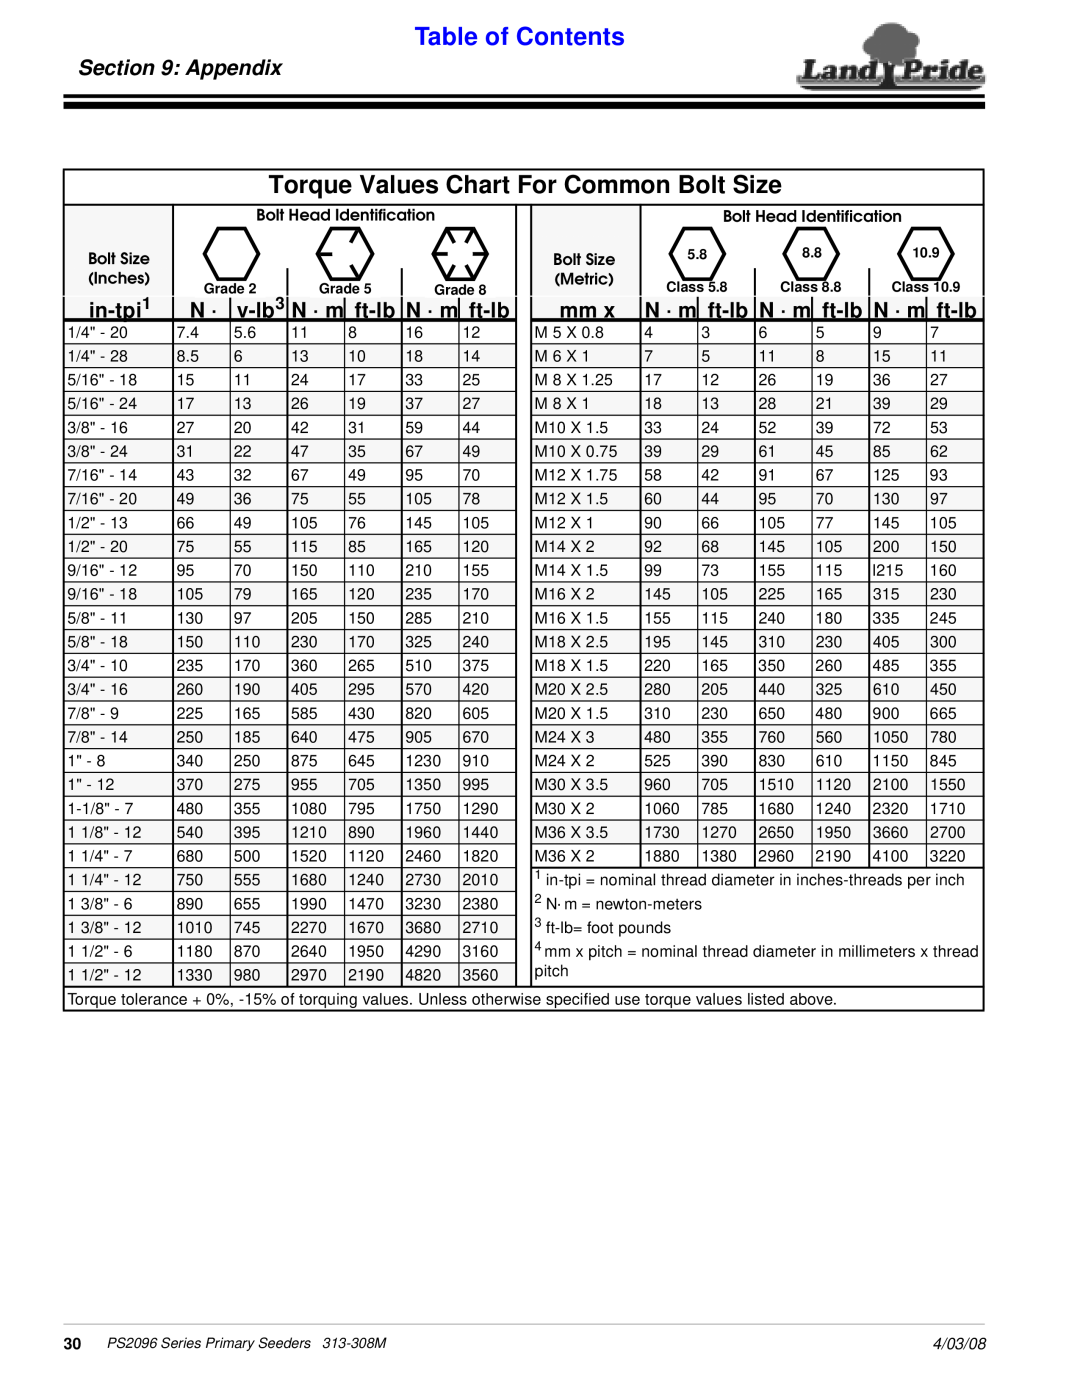 Land Pride 313-308M Torque Values Chart For Common Bolt Size, Appendix, in-tpi1, N · m, ft-lb, v-lb3, Table of Contents 